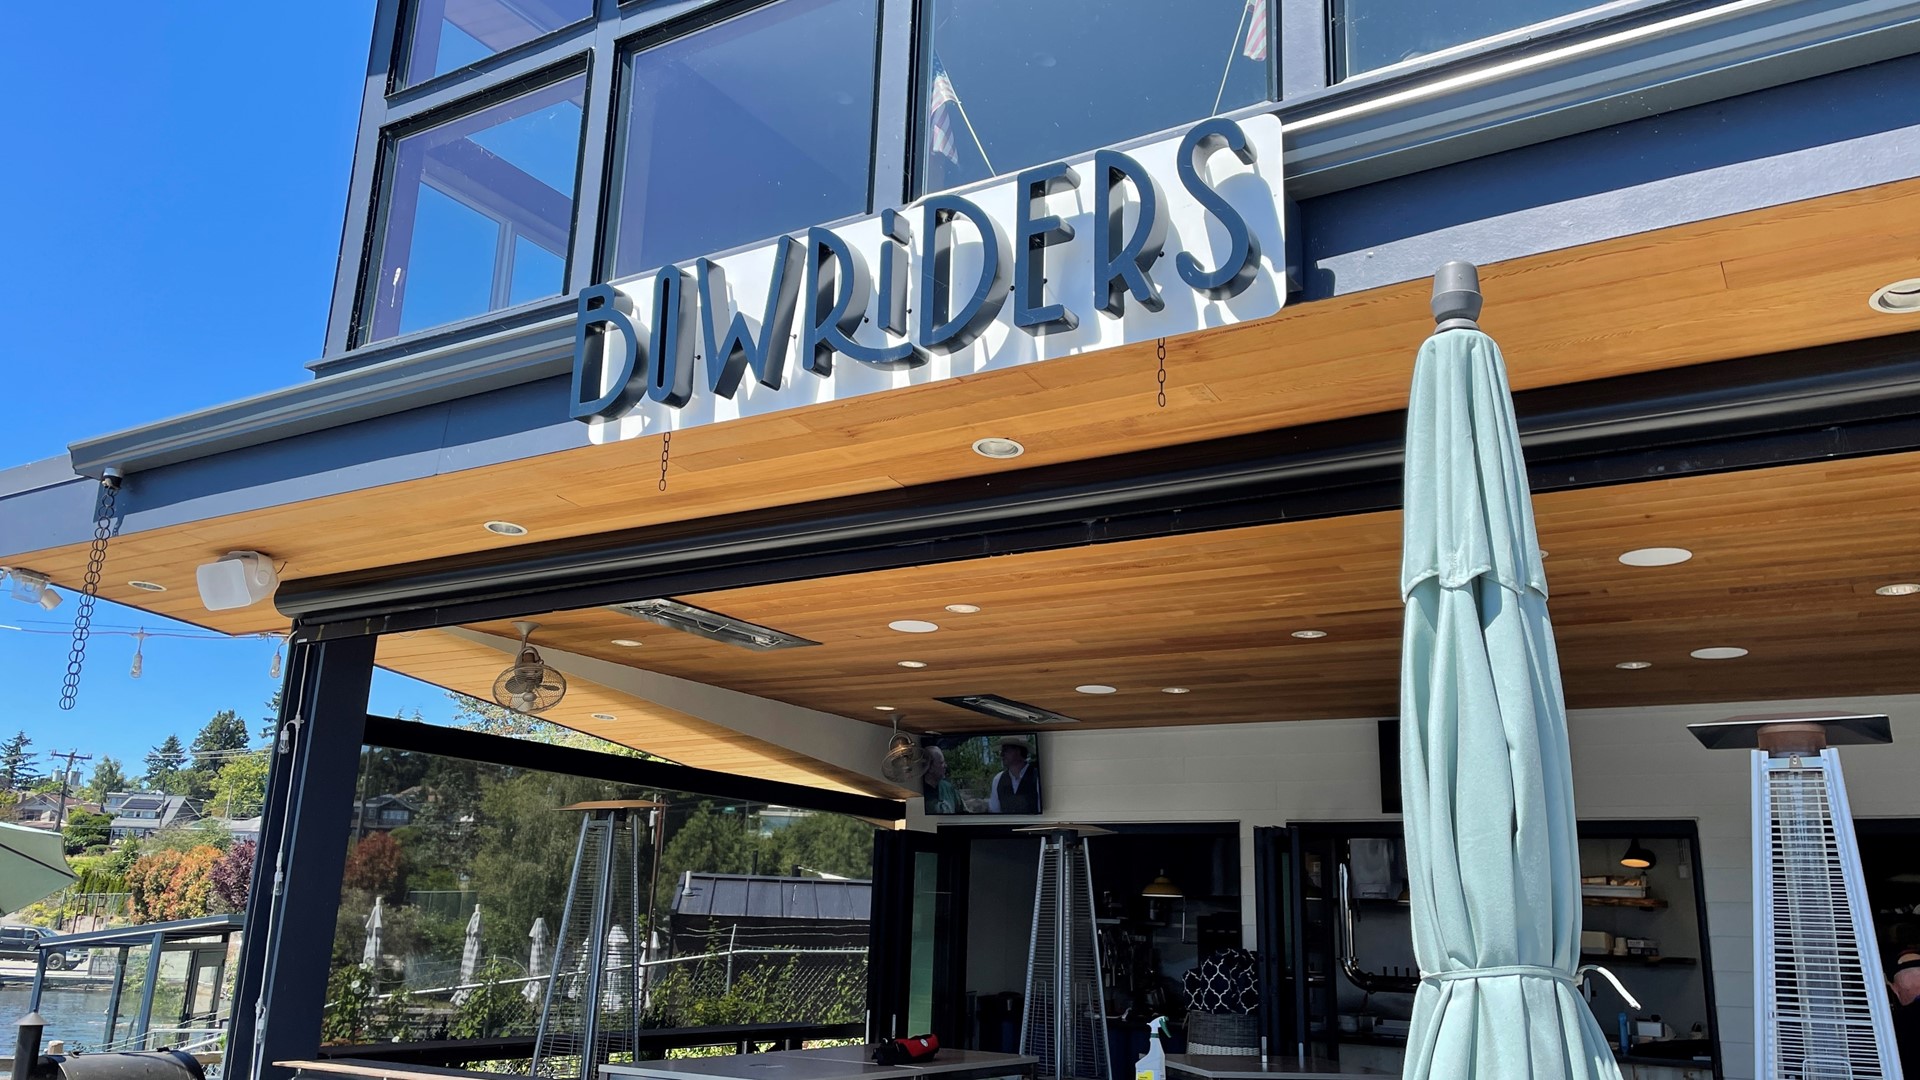 Bowriders Grill serves up smoked meat, fresh cookies, and refreshing drinks on the shores of Lake Union. #k5evening